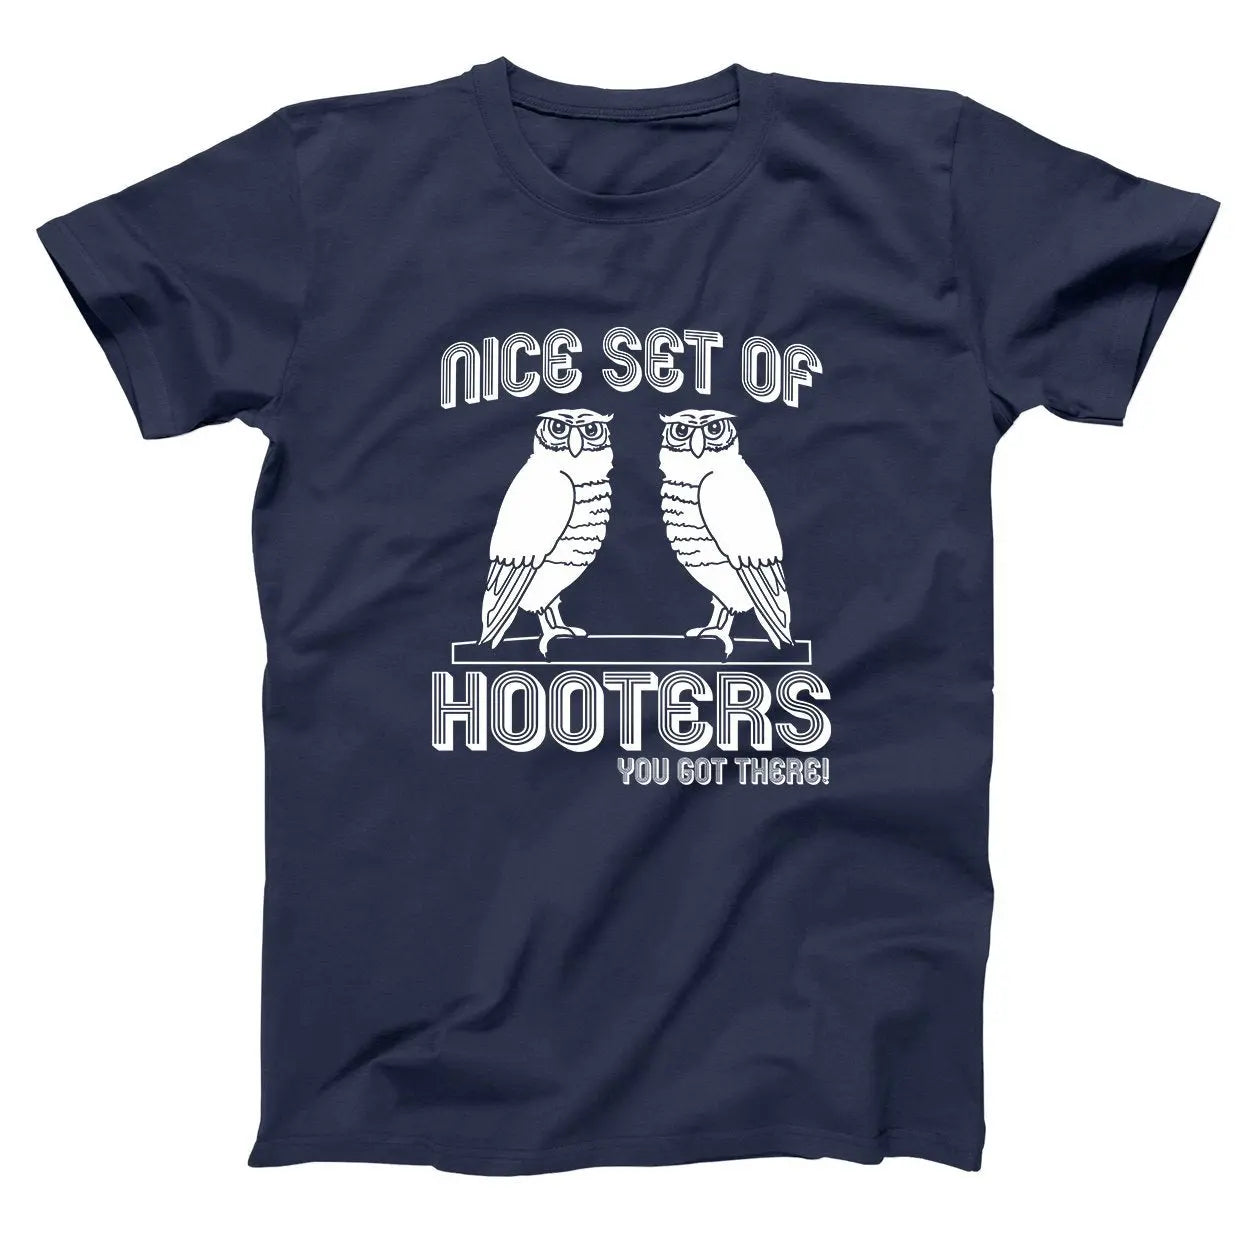 Nice Set Of Hooters You Got There Tshirt - Donkey Tees